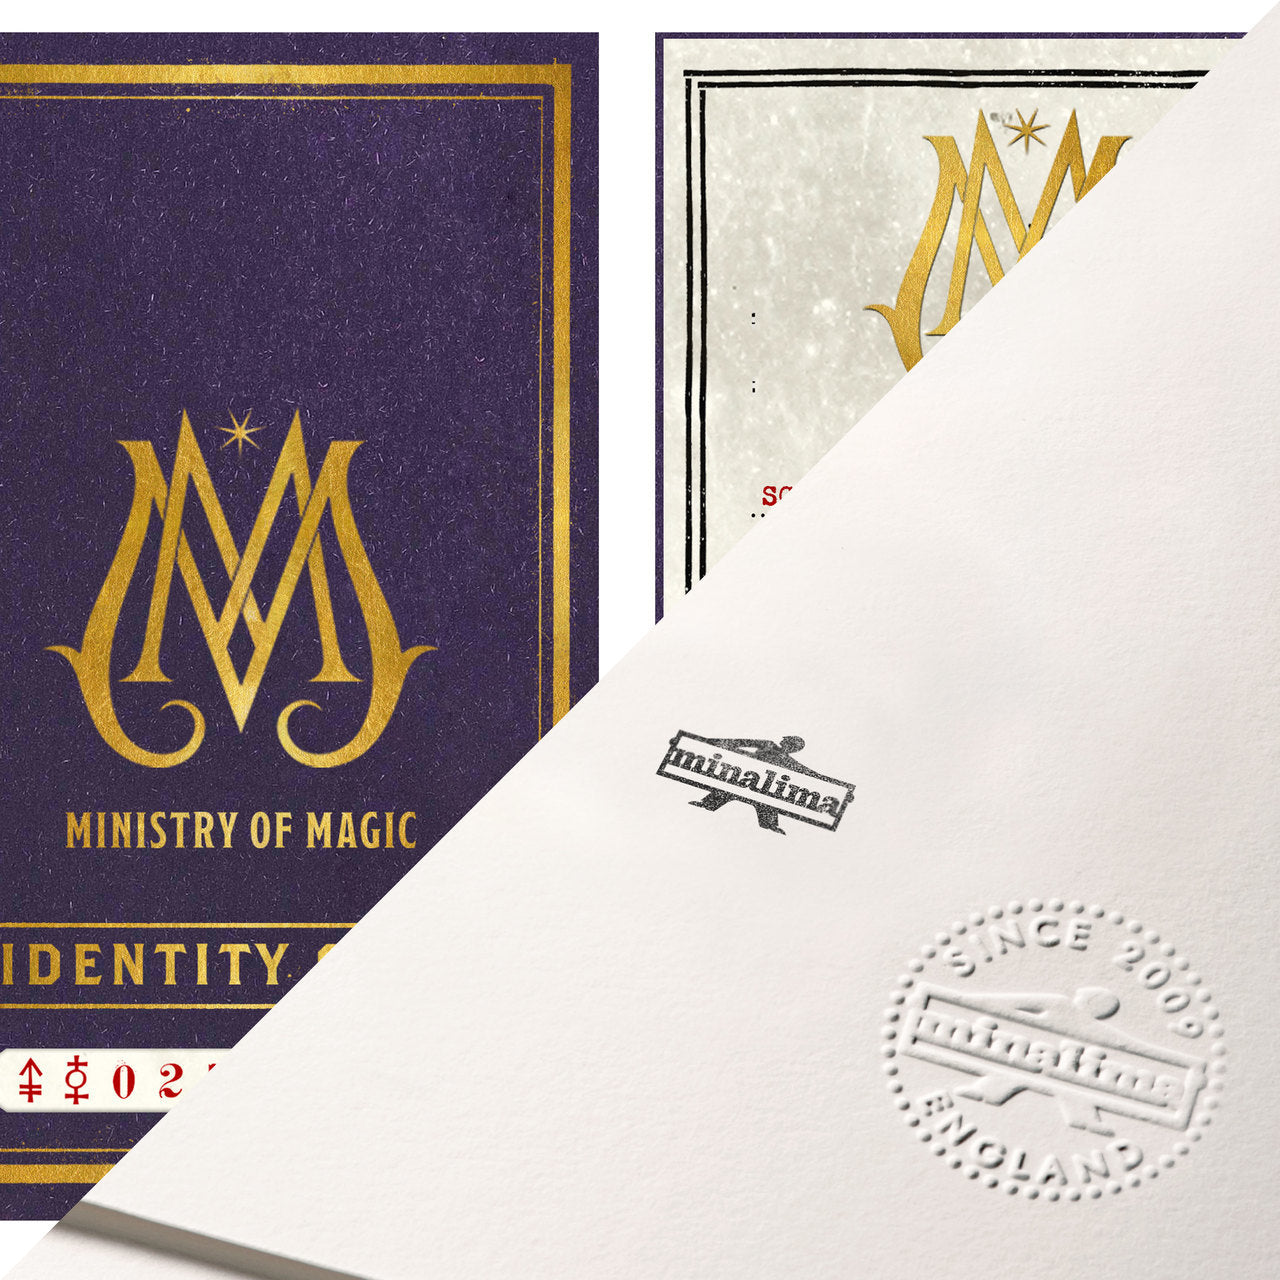 Newt Scamander Ministry of Magic I.D. Card Limited Edition Art Print